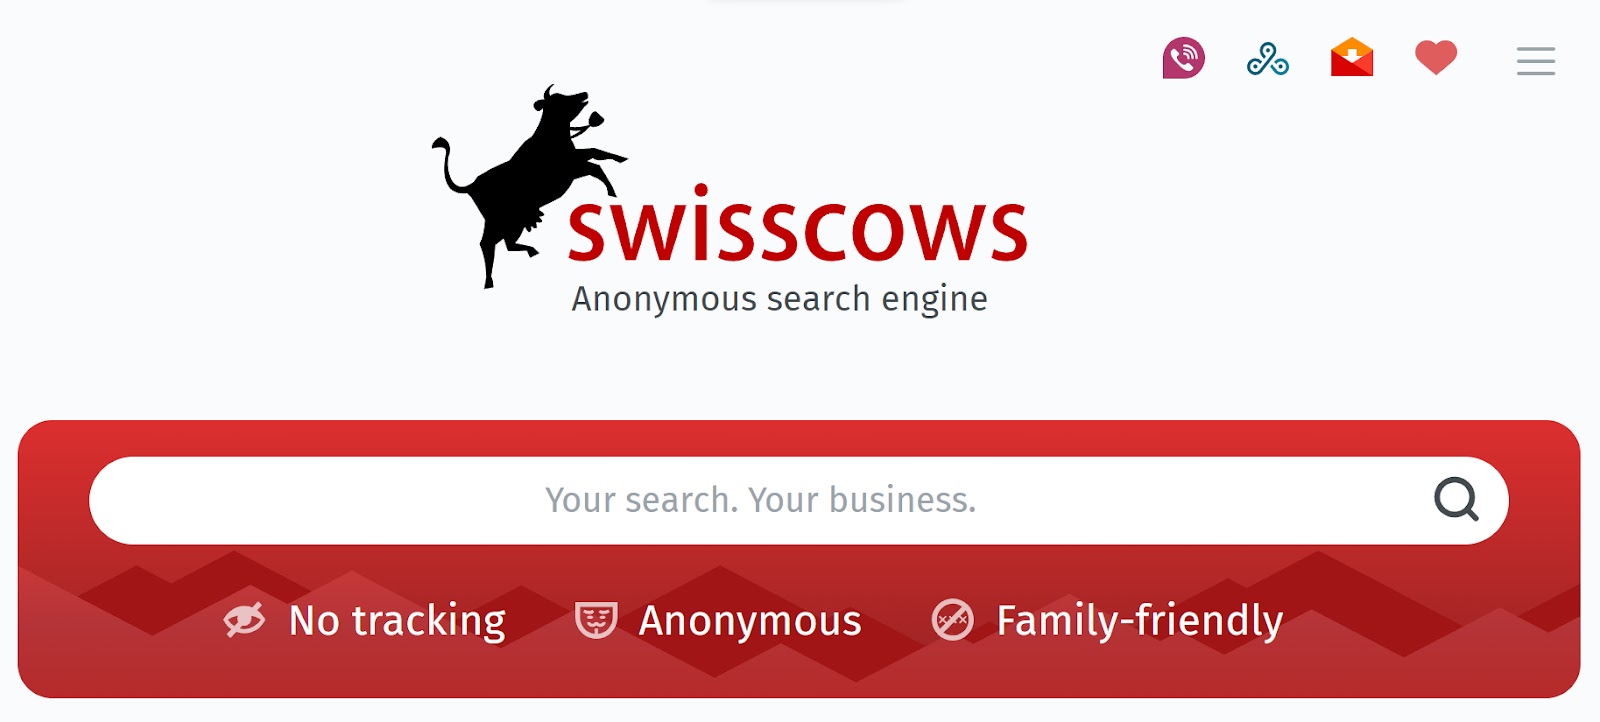 Swisscows search engine